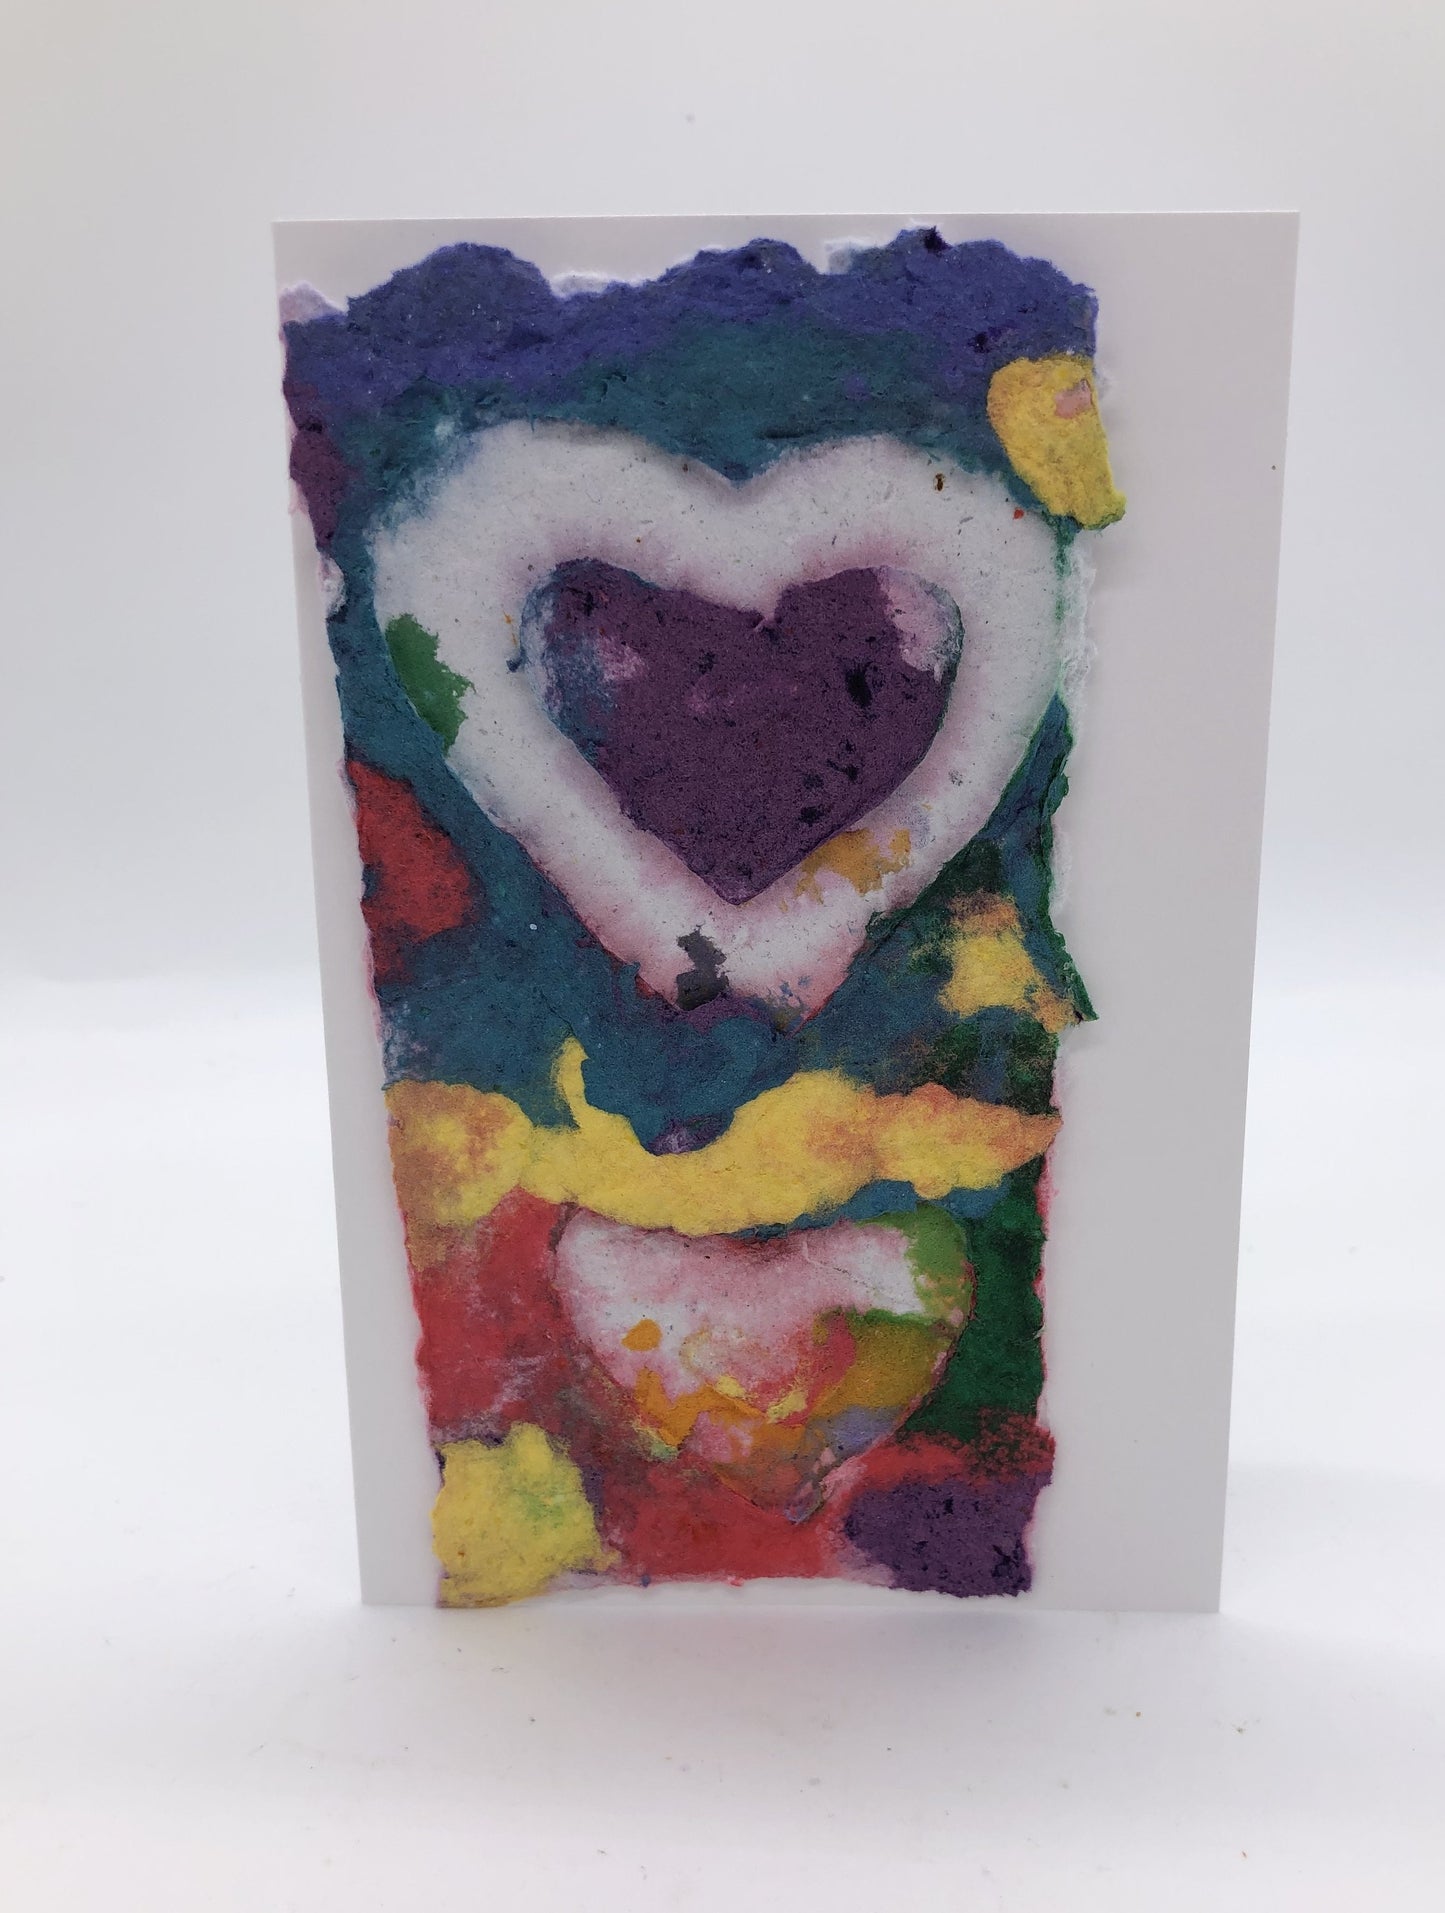 Handmade paper greeting card with blue, teal, yellow and red colors  in the background and a white and purpleheart